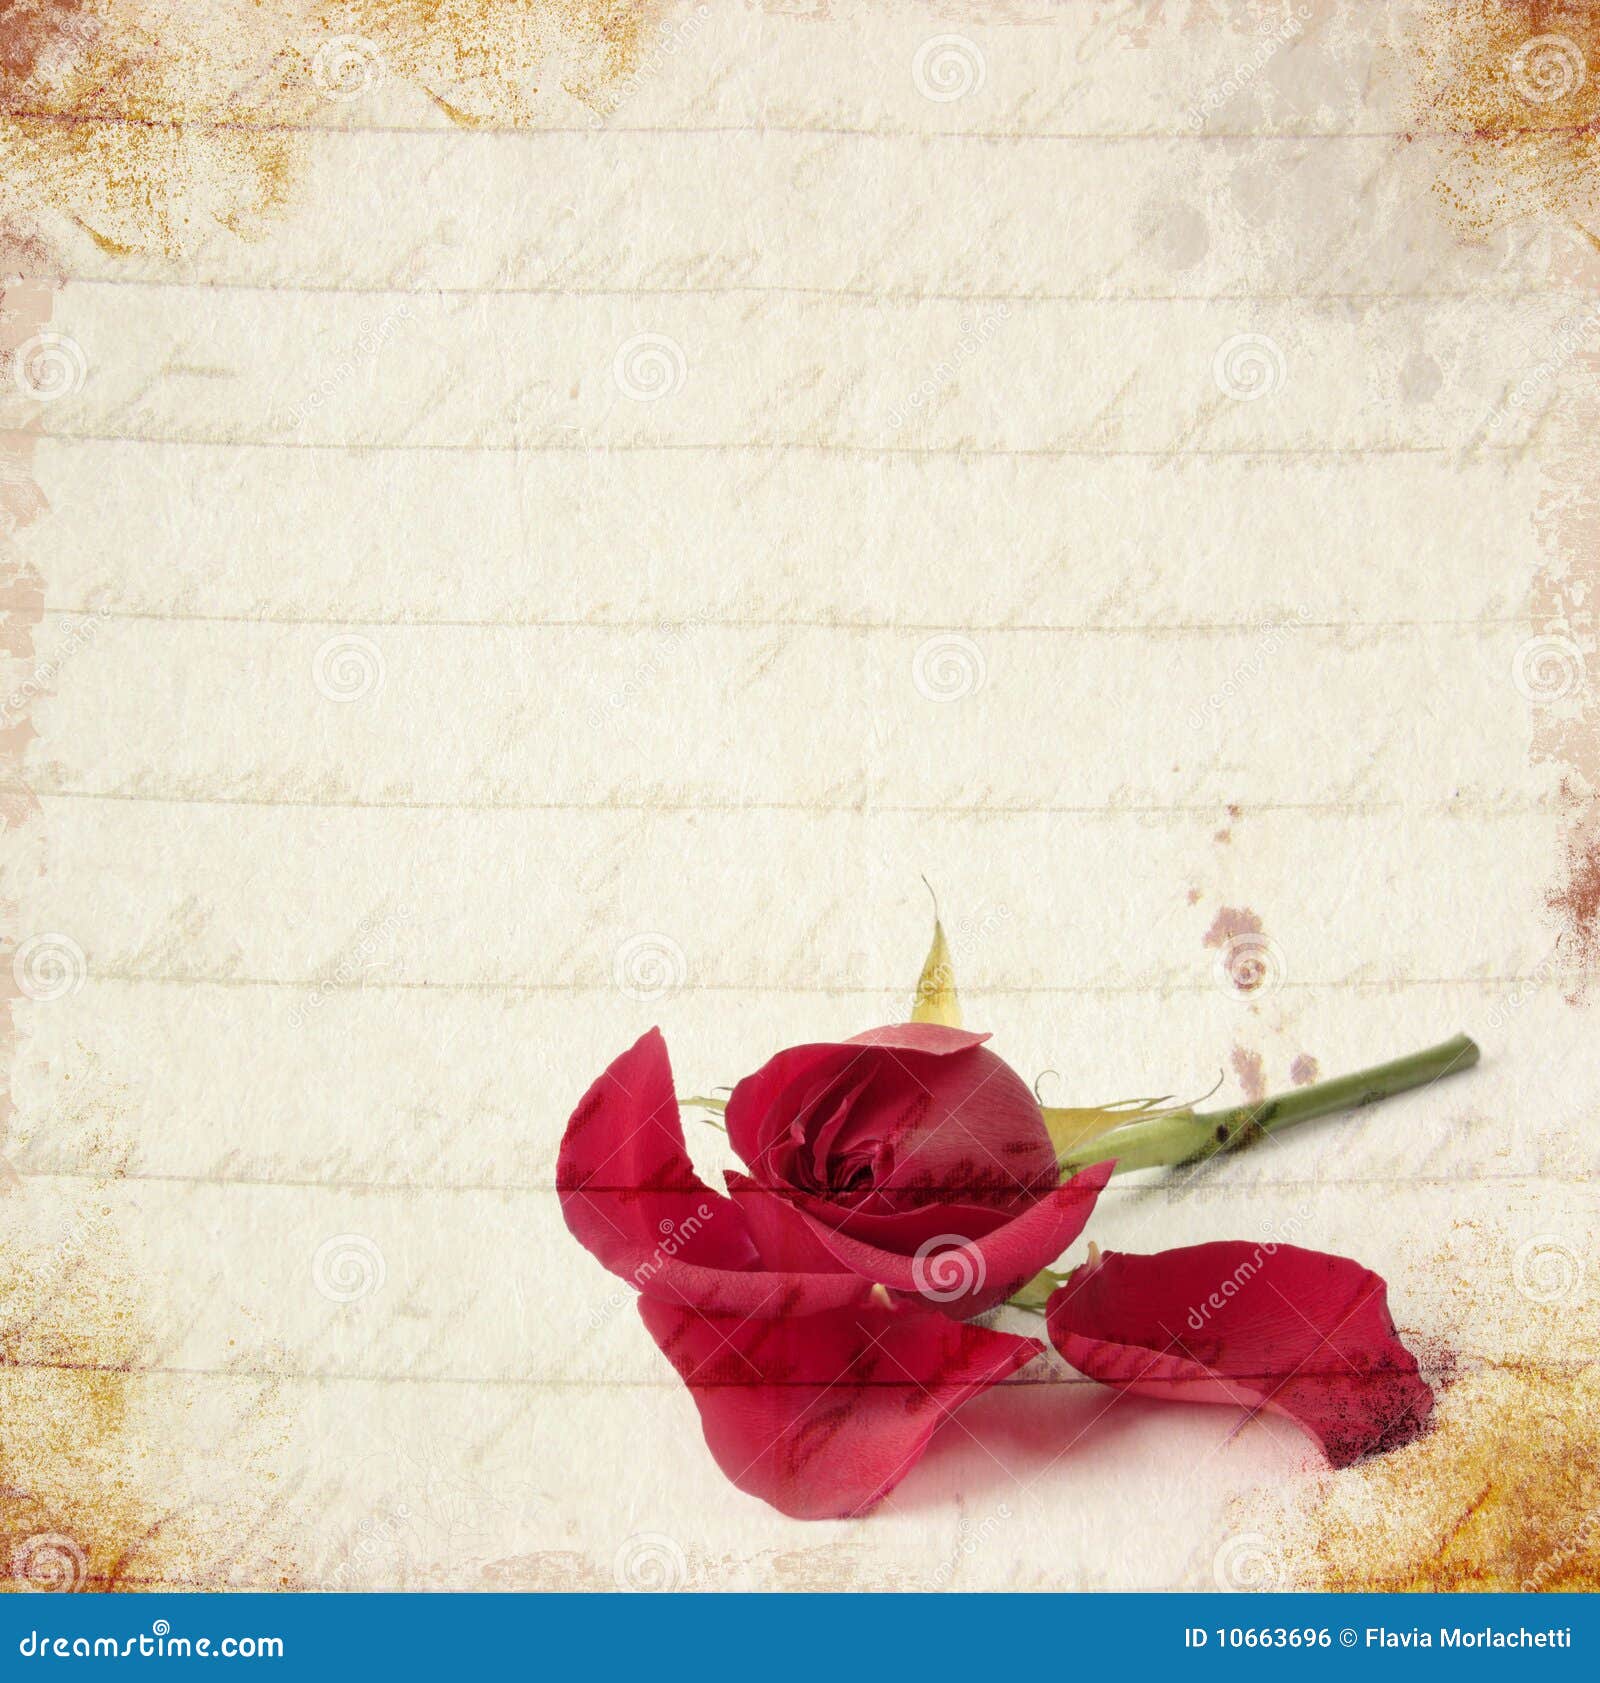 Red rose vintage card stock photo. Image of flower, aroma - 10663696